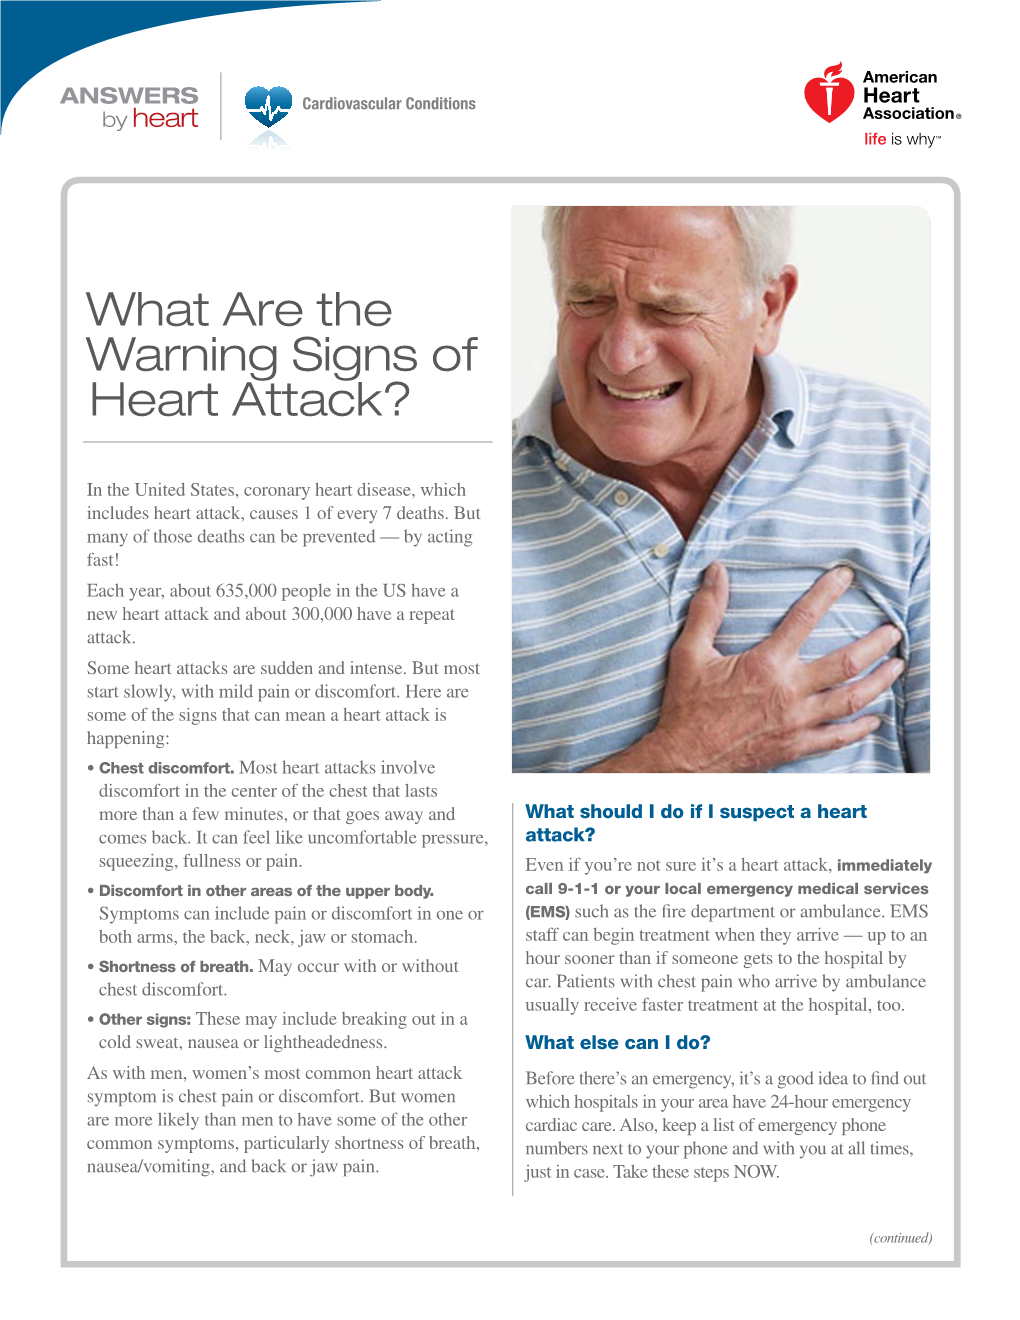 What Are the Warning Signs of Heart Attack?